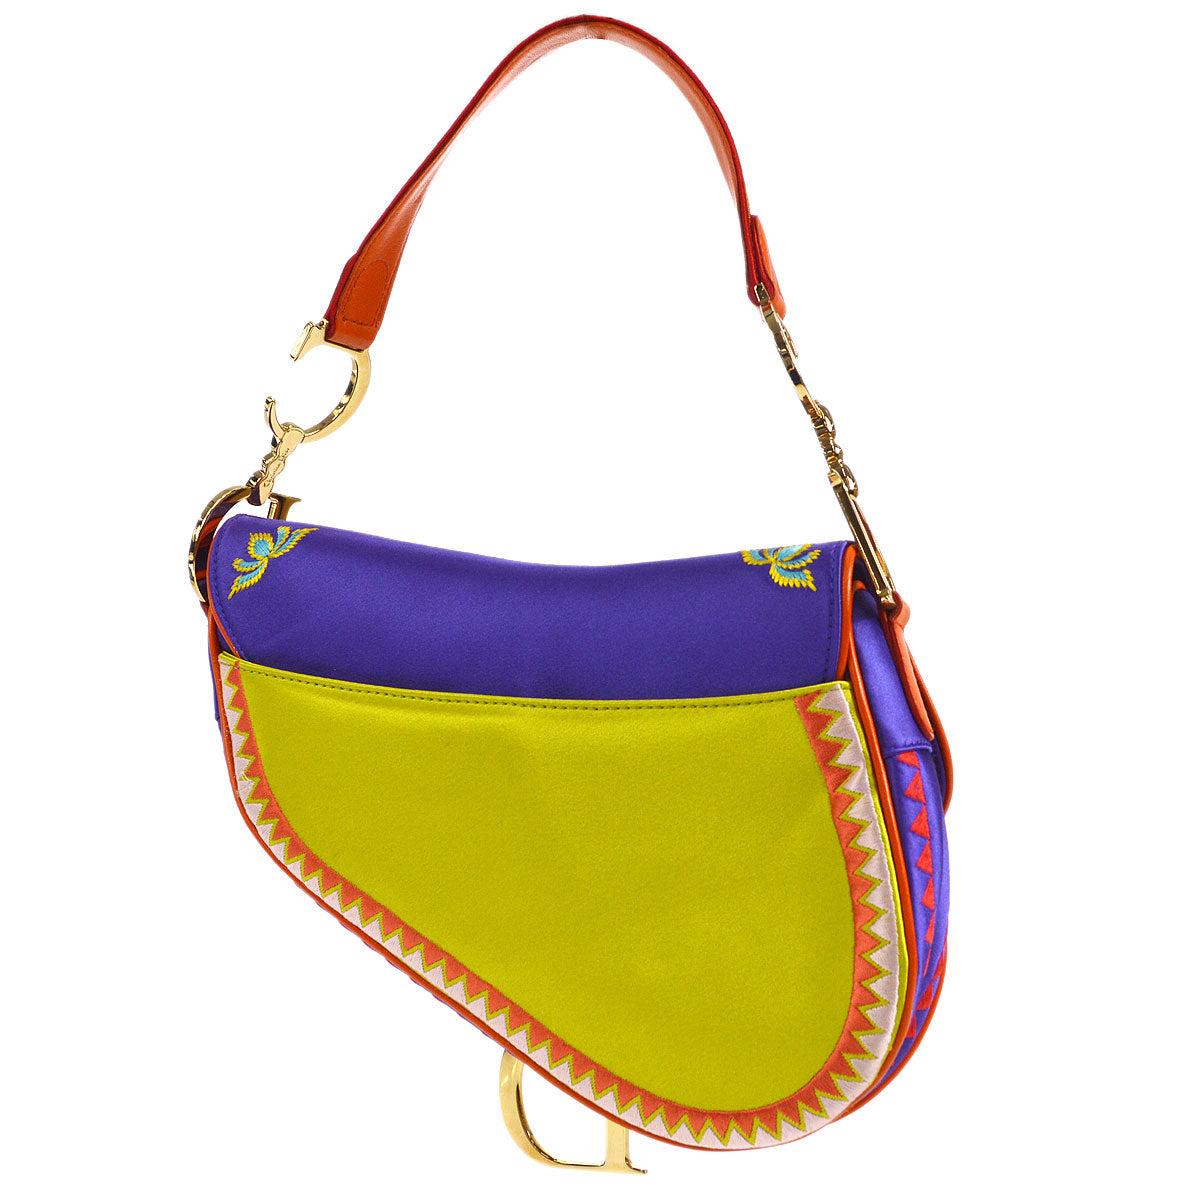 Christian Dior Vintage Limited Edition Embroidered Saddle Bag Blue Yellow  Red